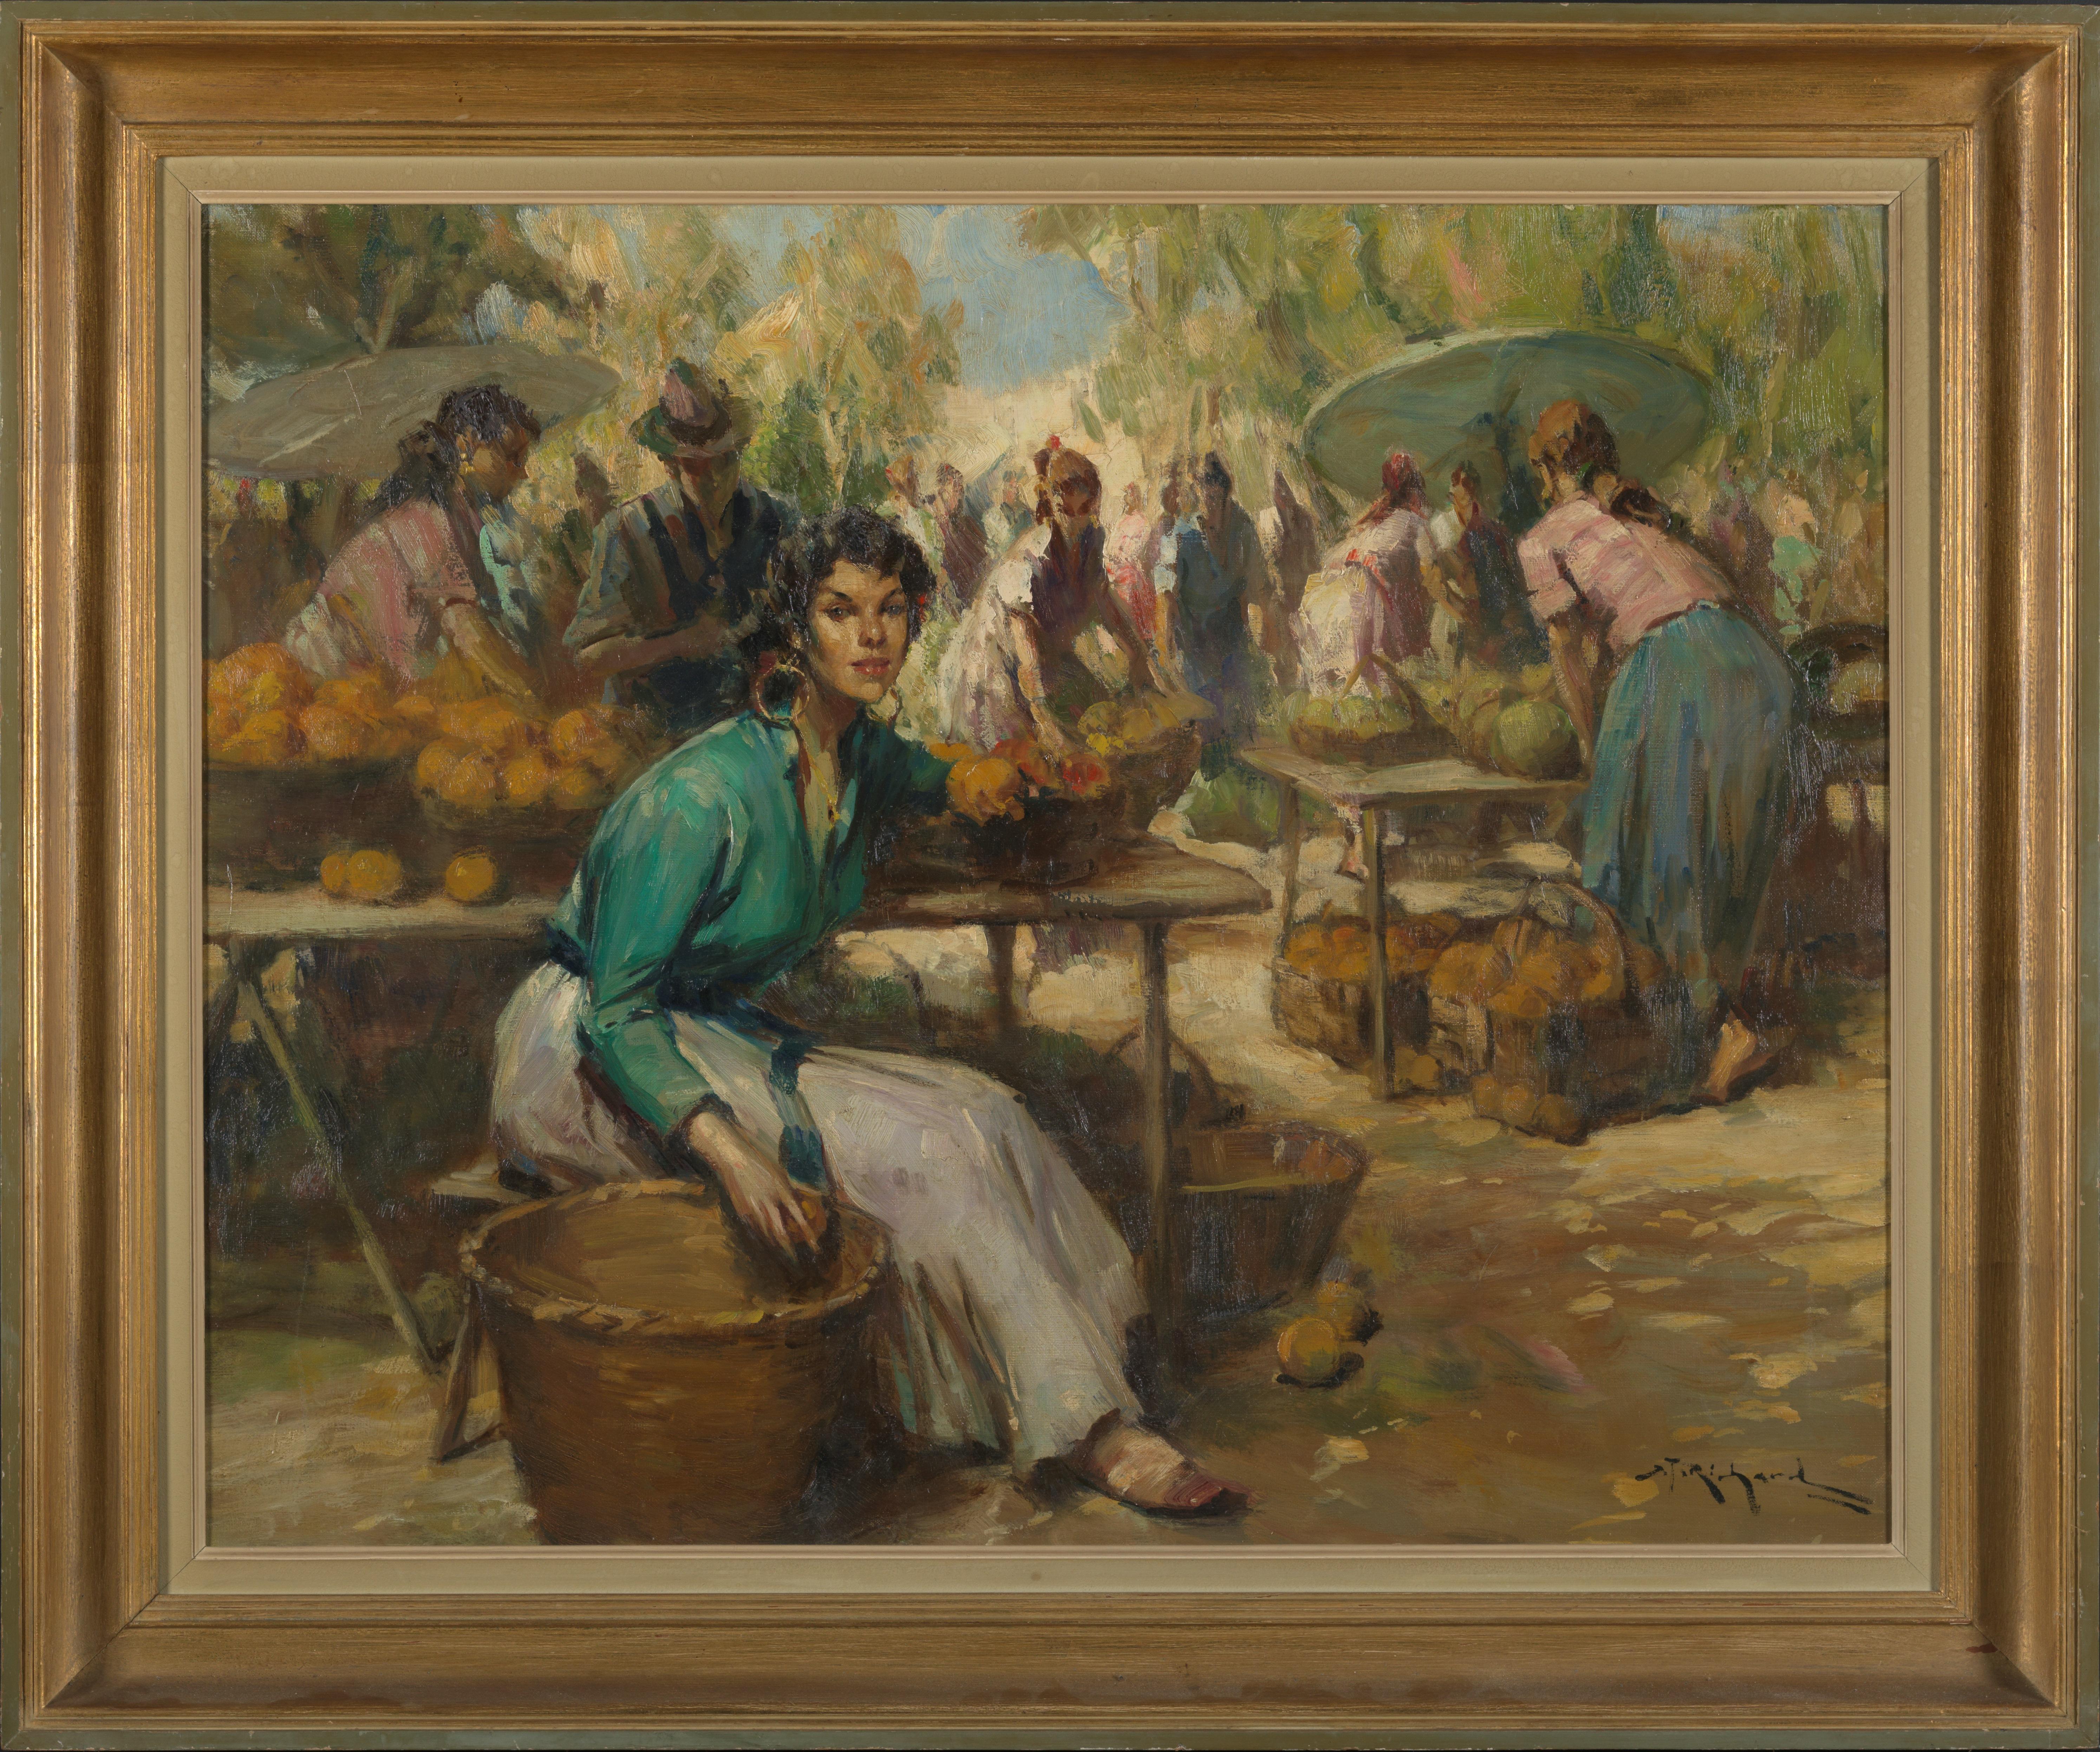 durando-togo Figurative Painting - Richard Durando-Togo, Women at the Market, Oil on Canvas, Framed and signed.